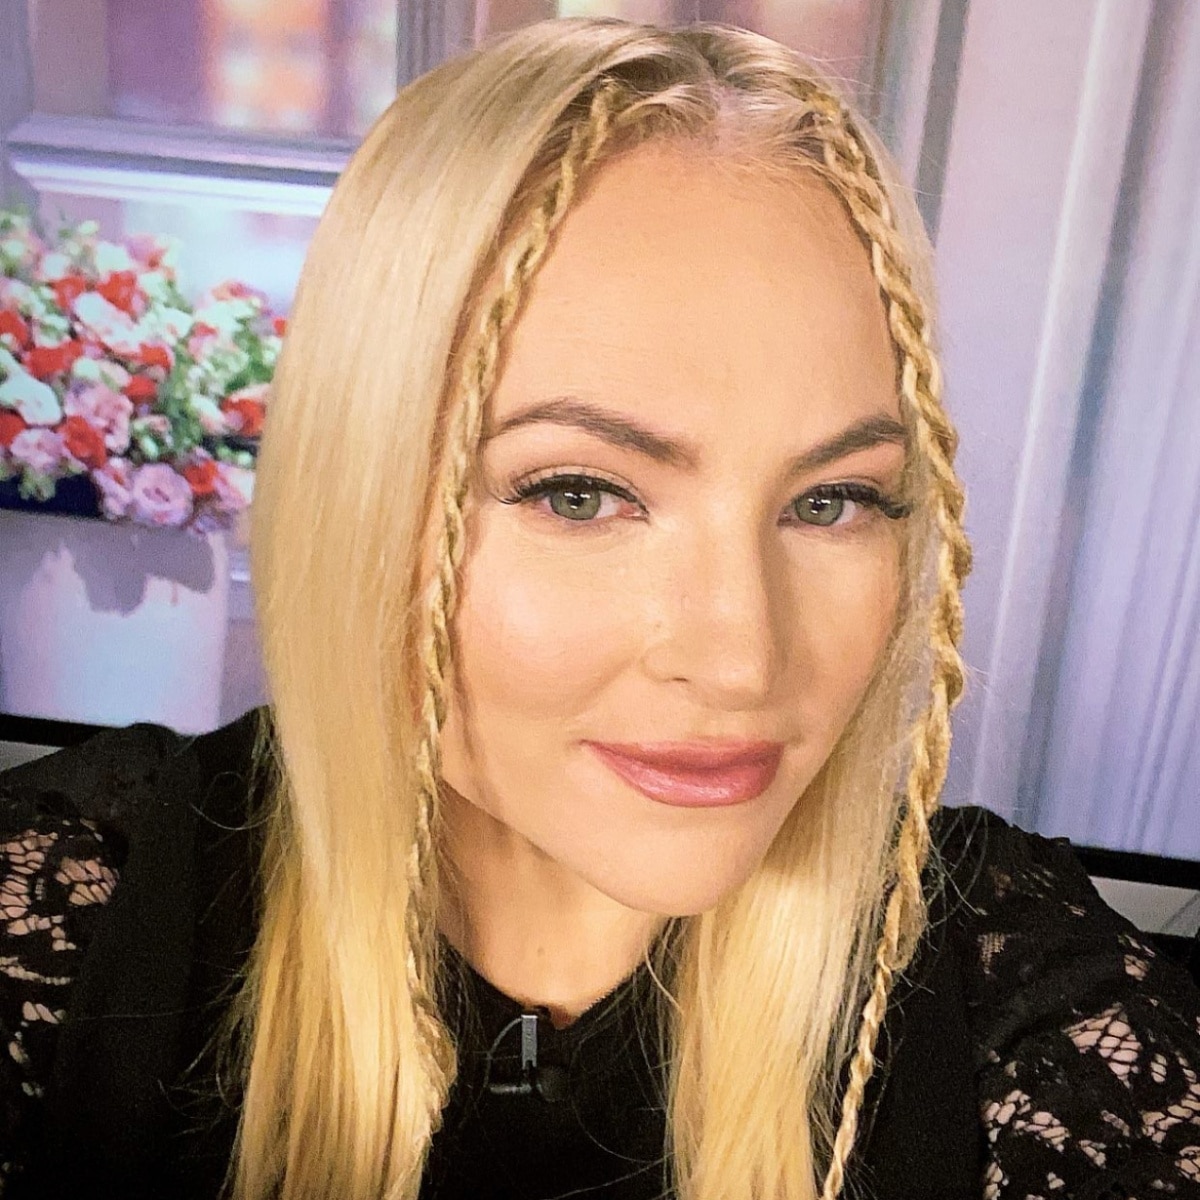 Meghan McCain Shares Message for Her Fellow "Nepo Babies"